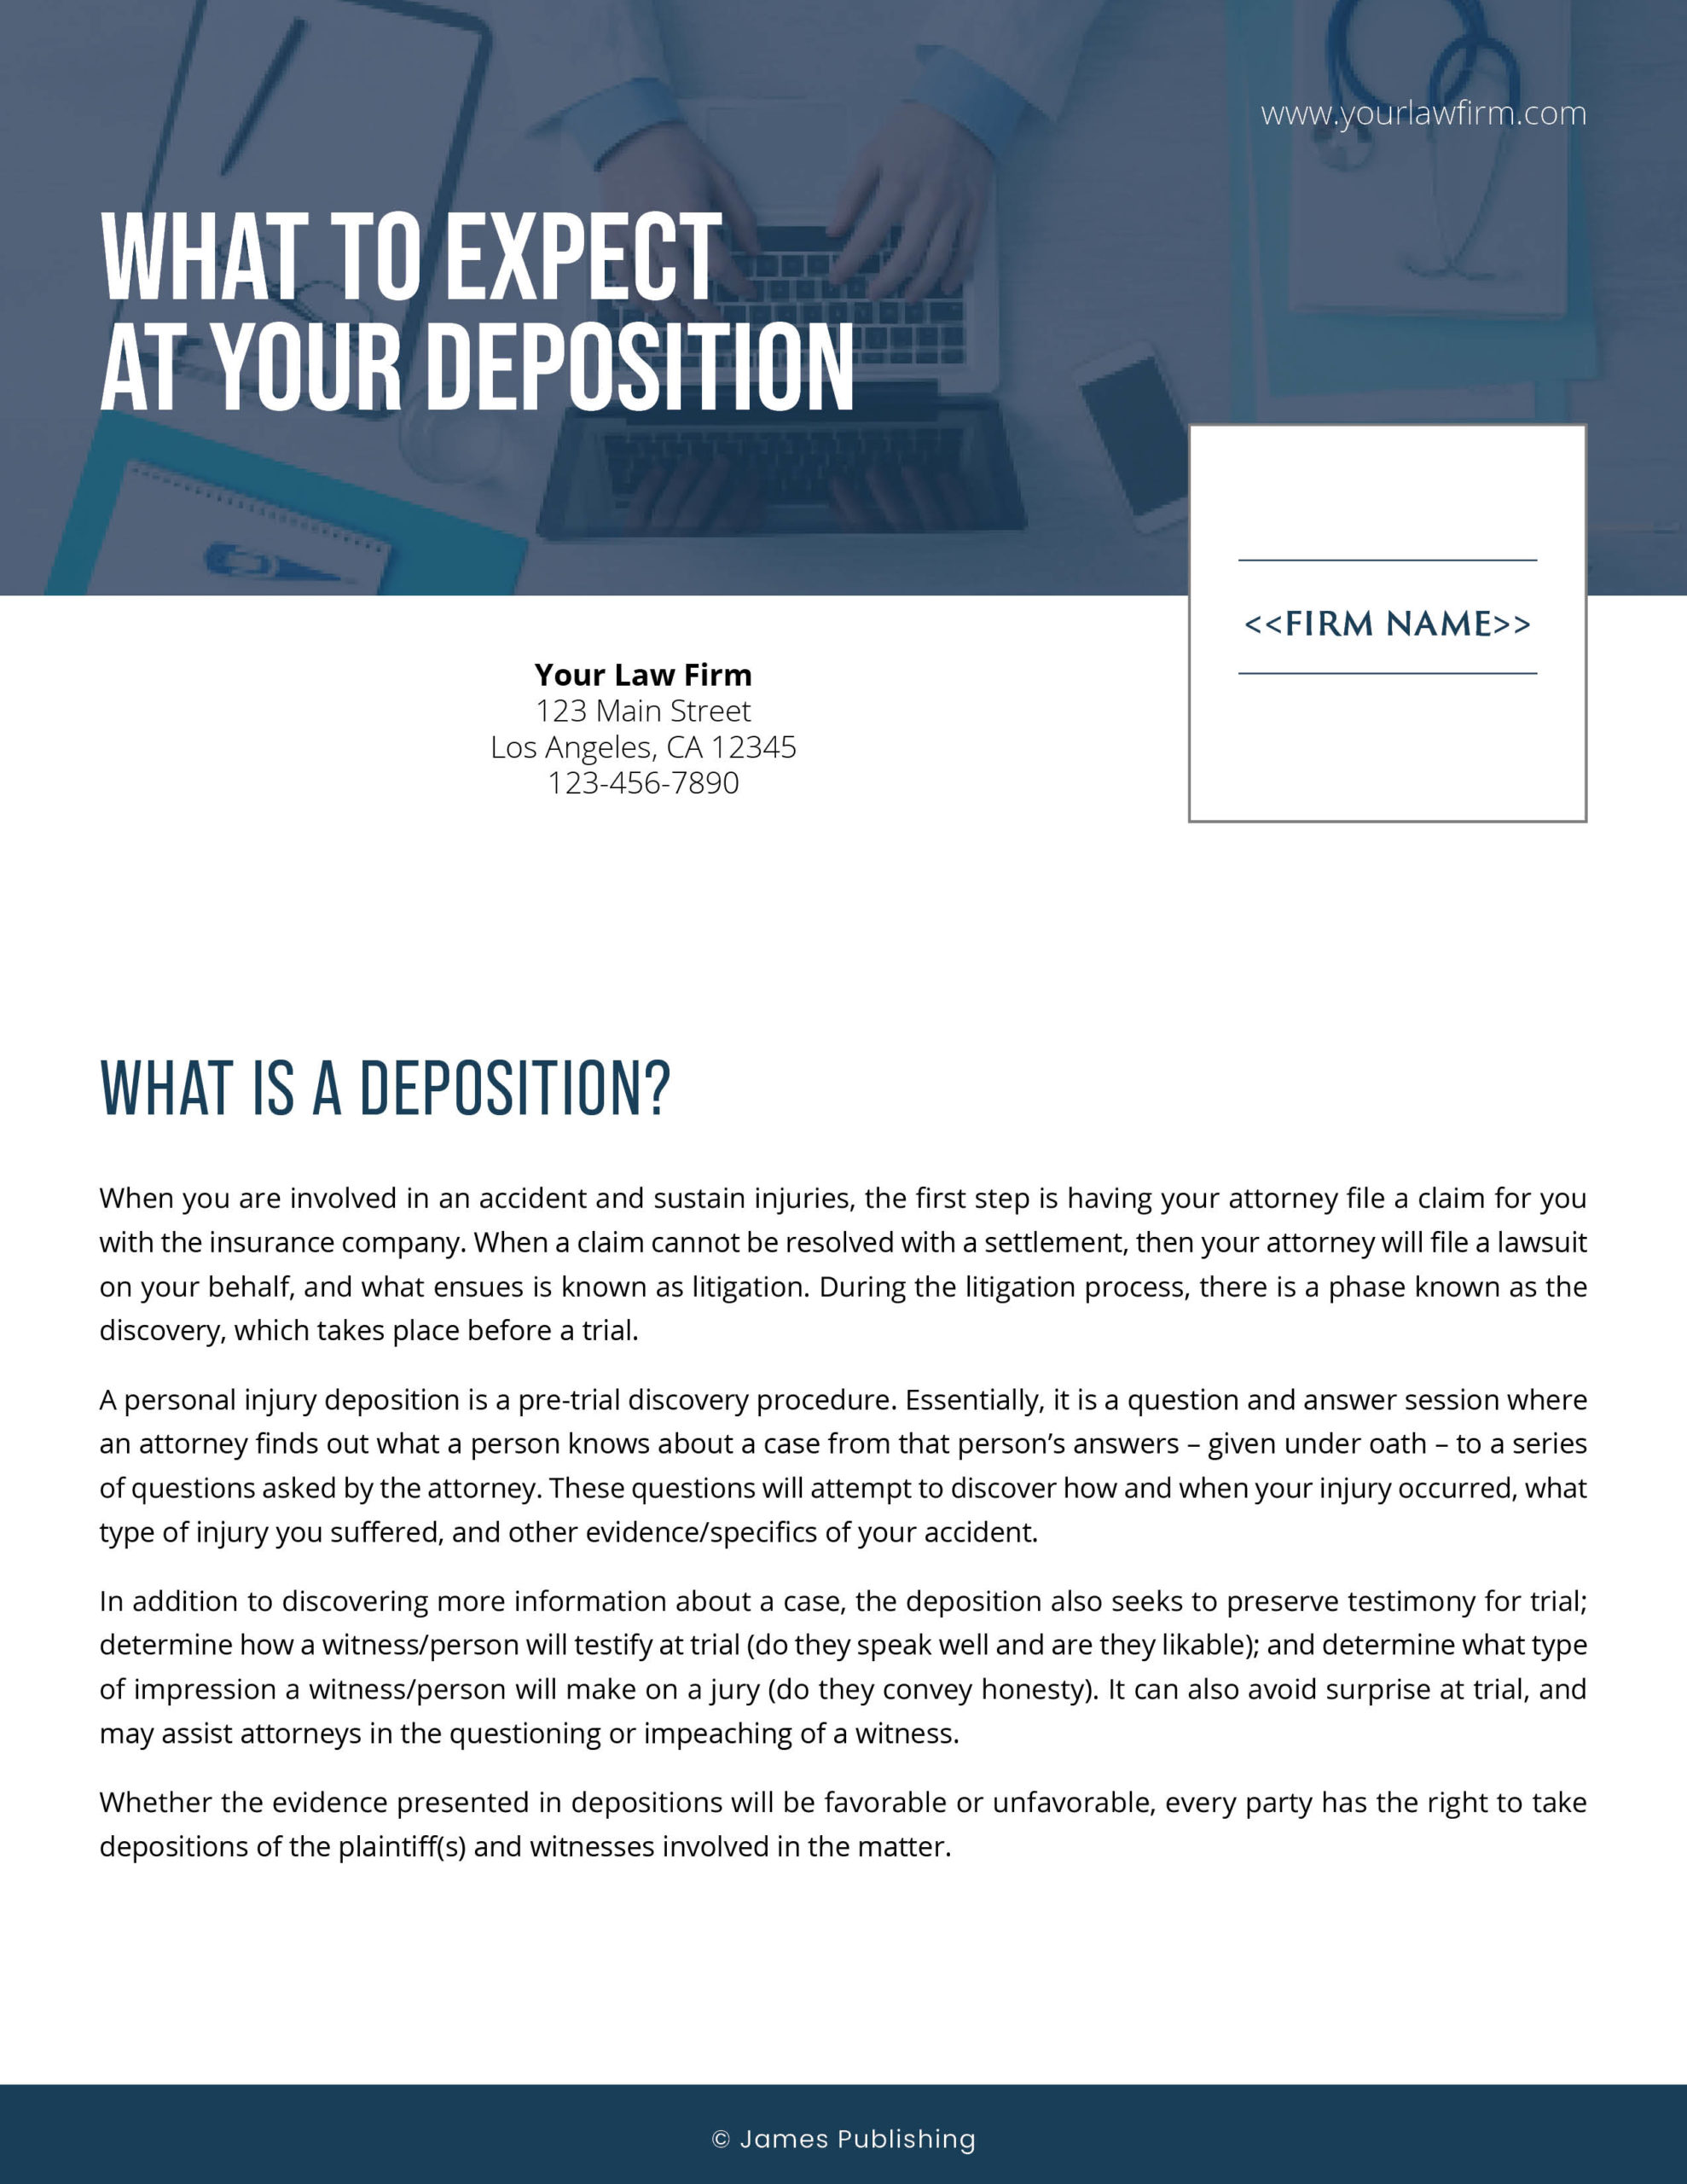 PI-26 What to Expect: At Your Deposition